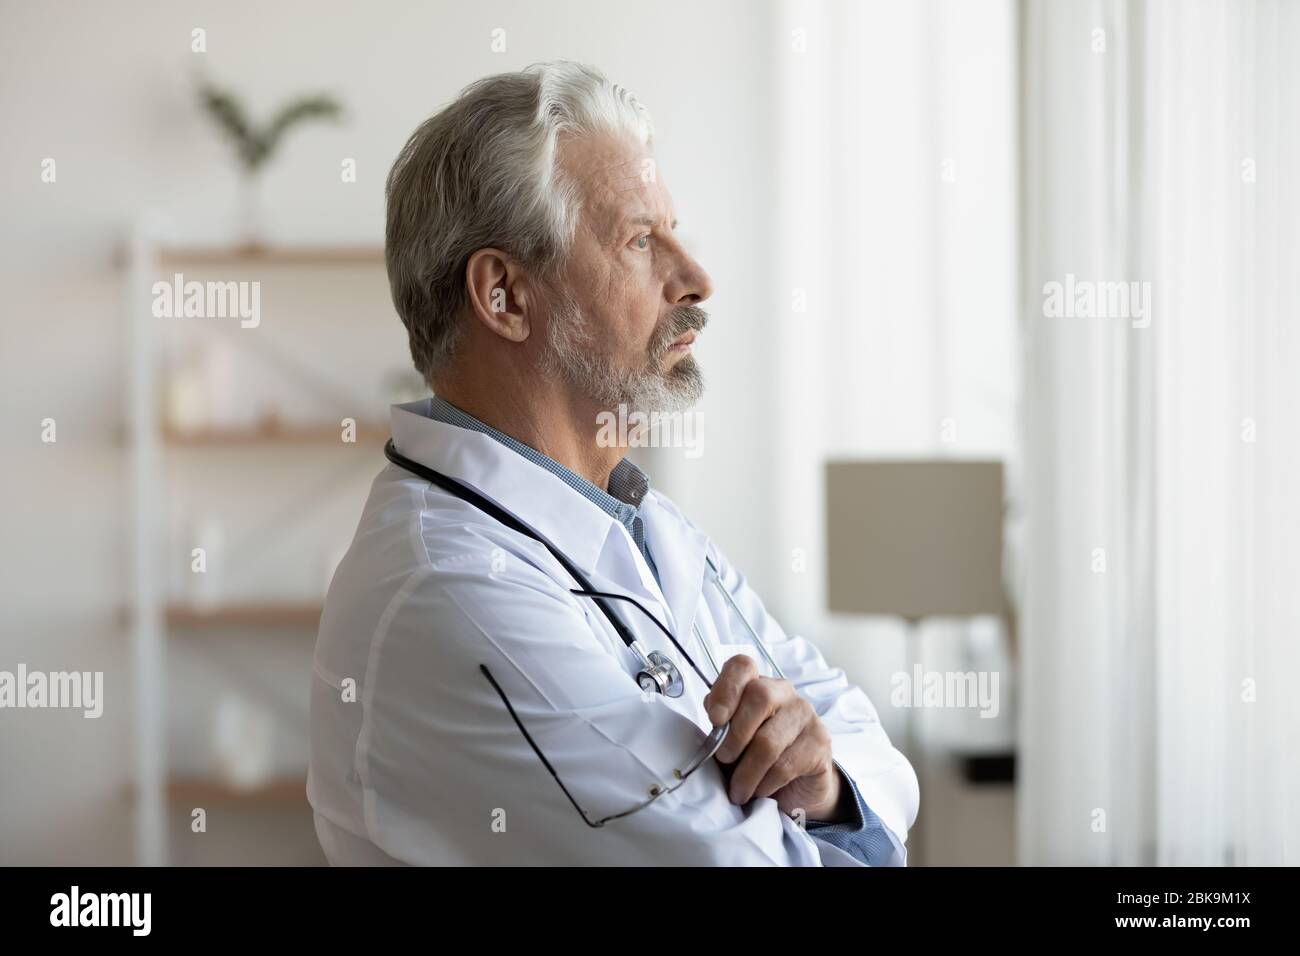 Thoughtful serious senior doctor looking through window lost in thoughts Stock Photo